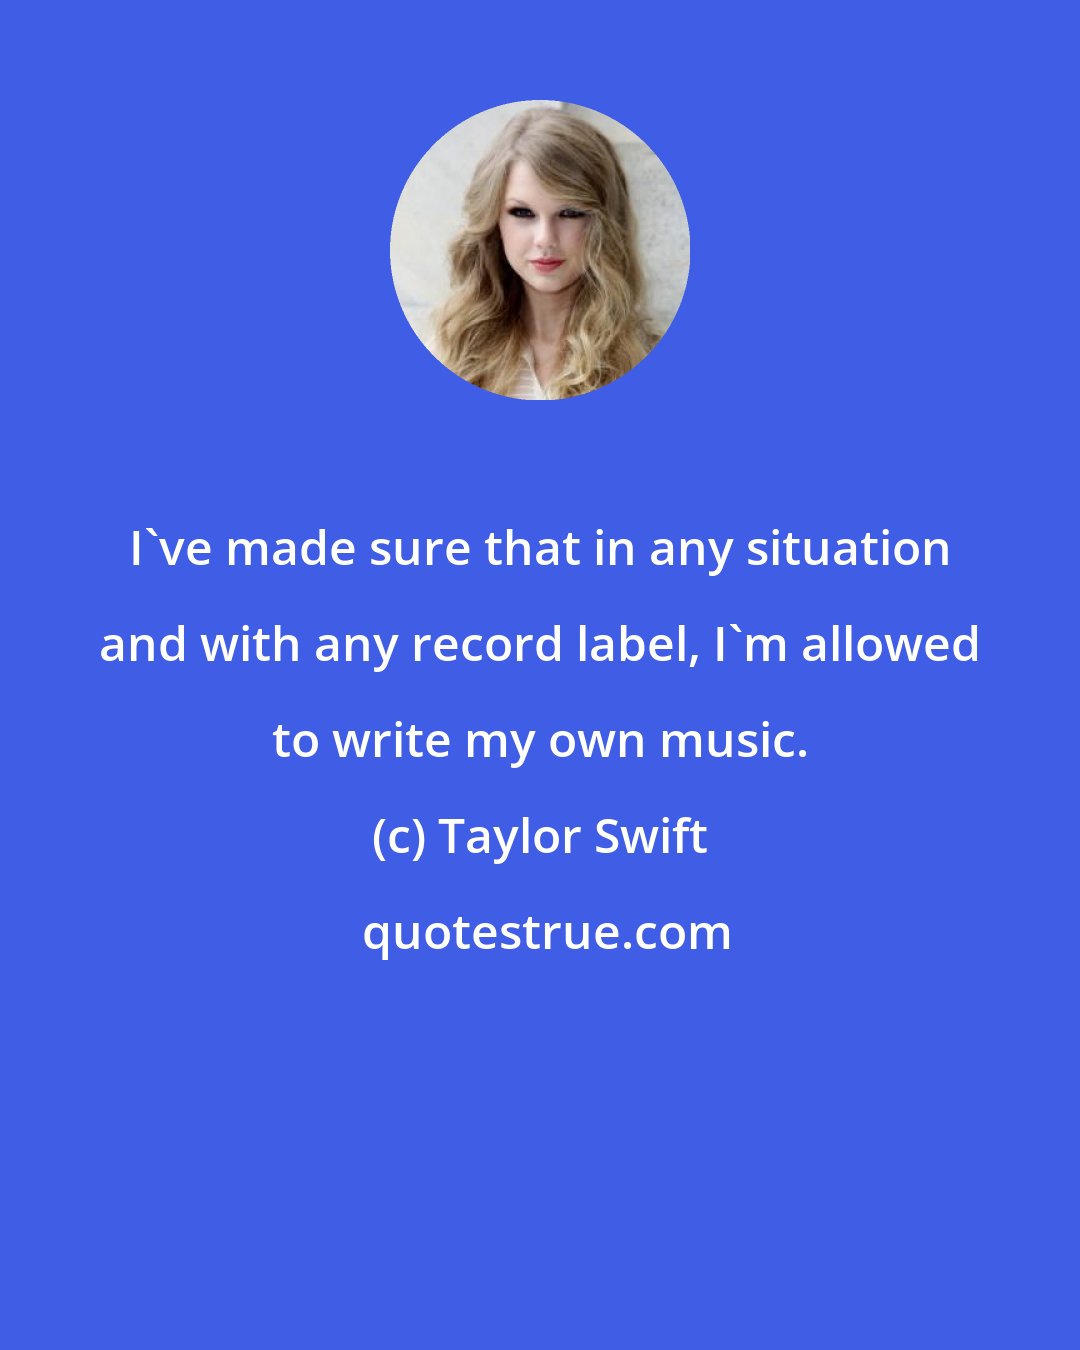 Taylor Swift: I've made sure that in any situation and with any record label, I'm allowed to write my own music.